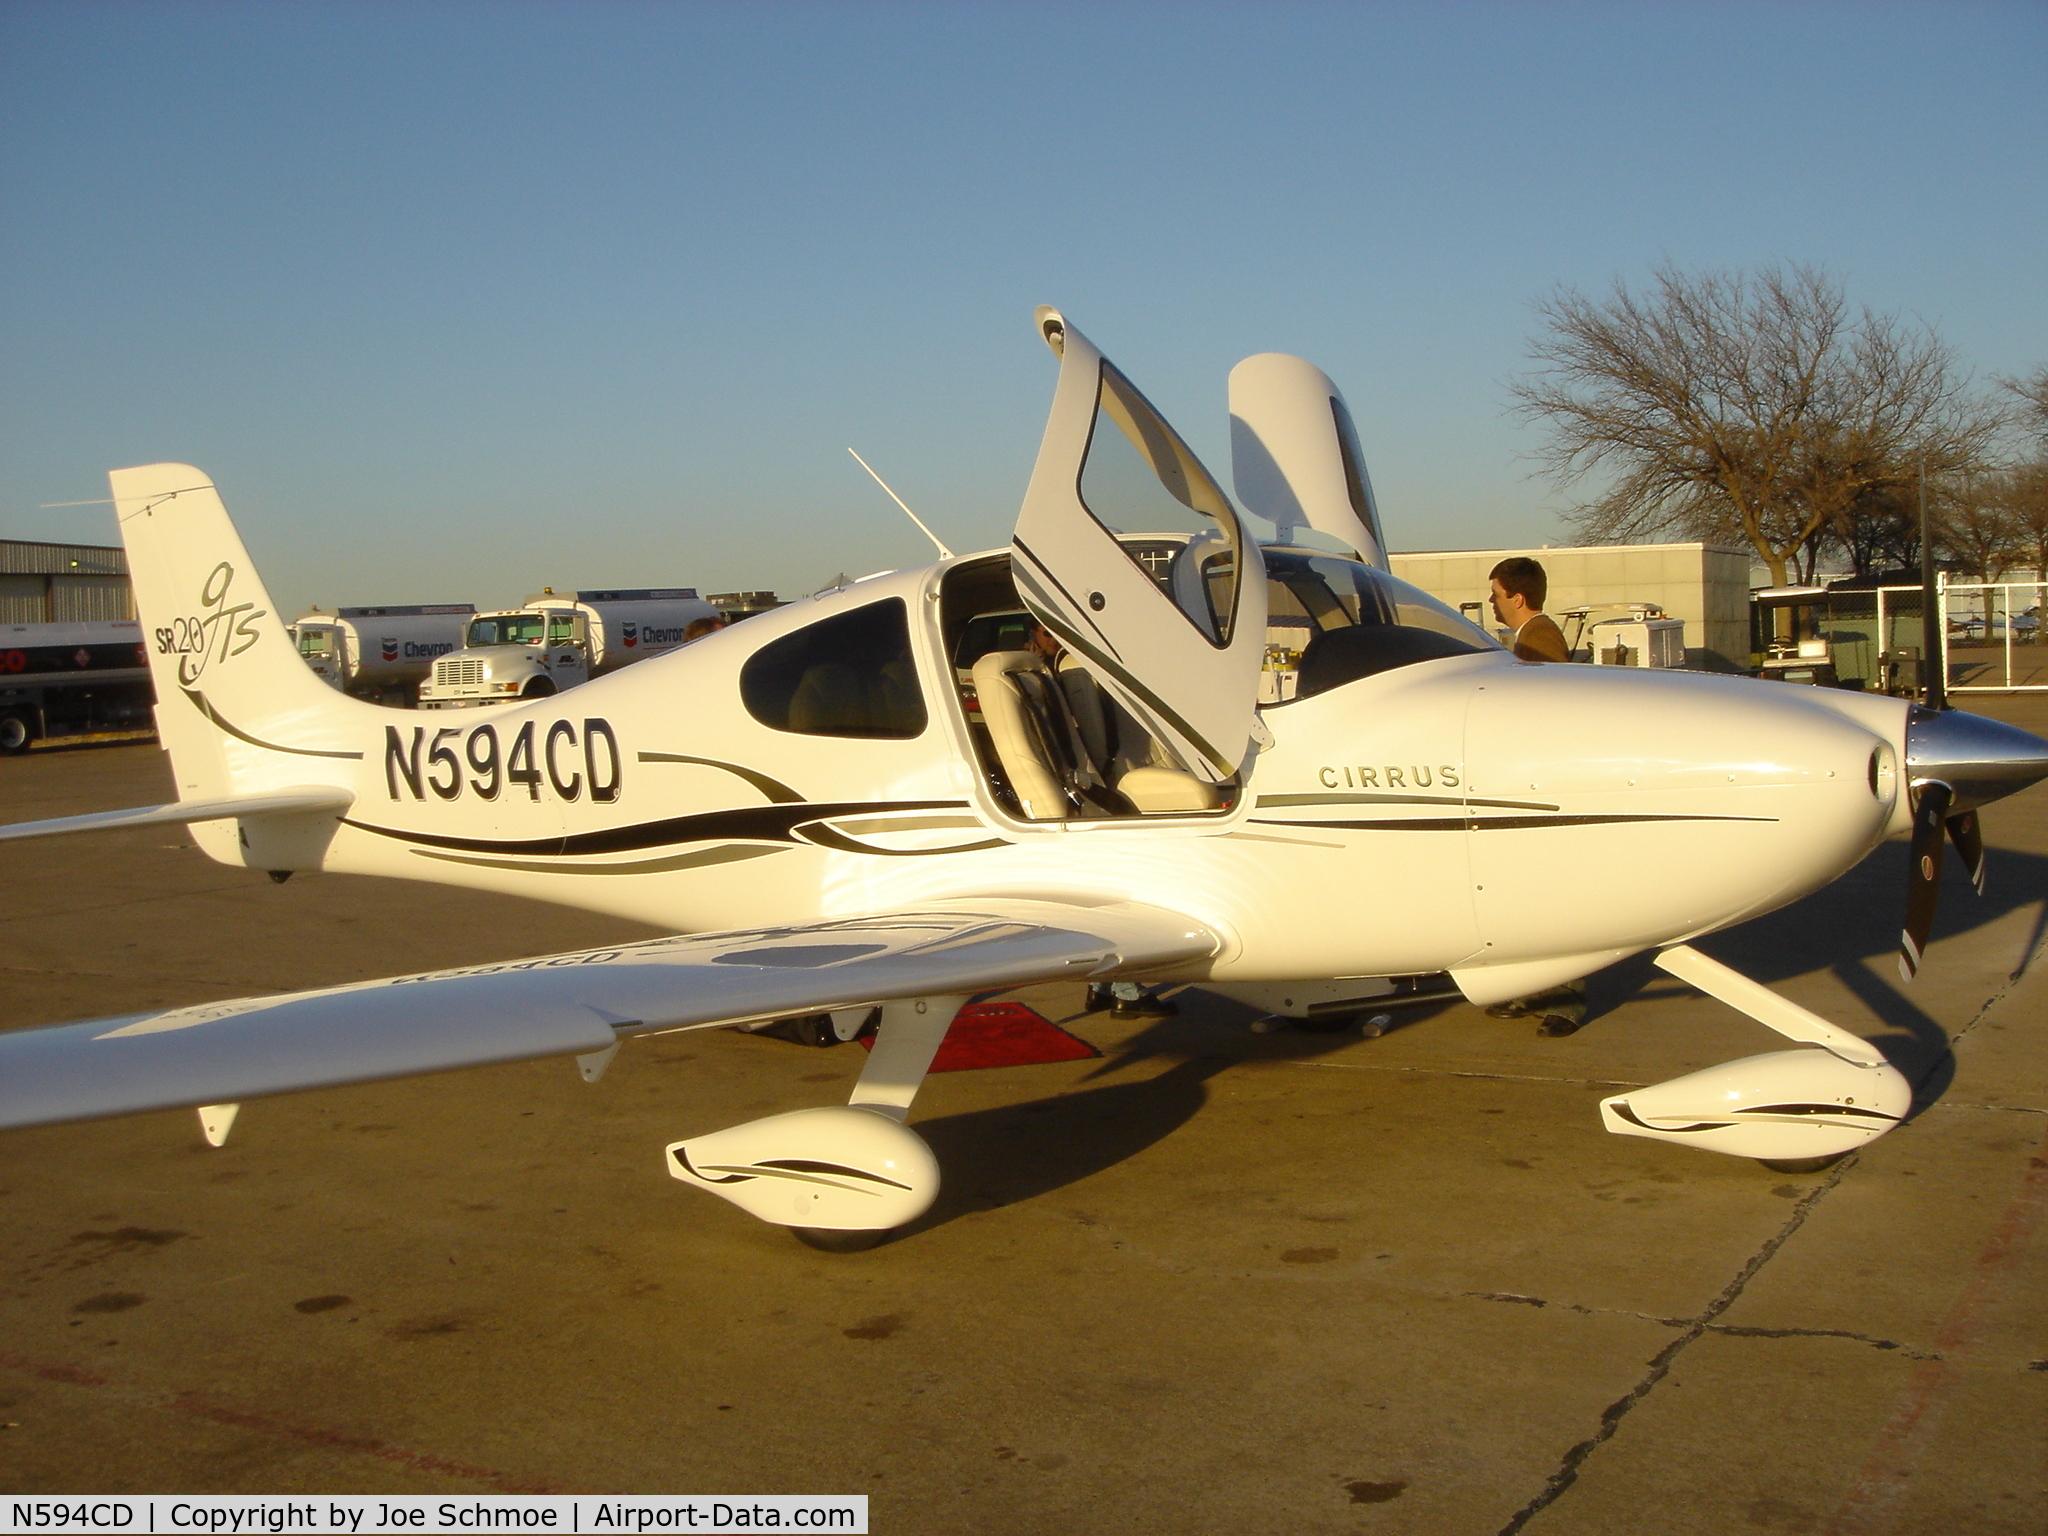 N594CD, 2006 Cirrus SR20 GTS C/N 1607, Brand new from the factory